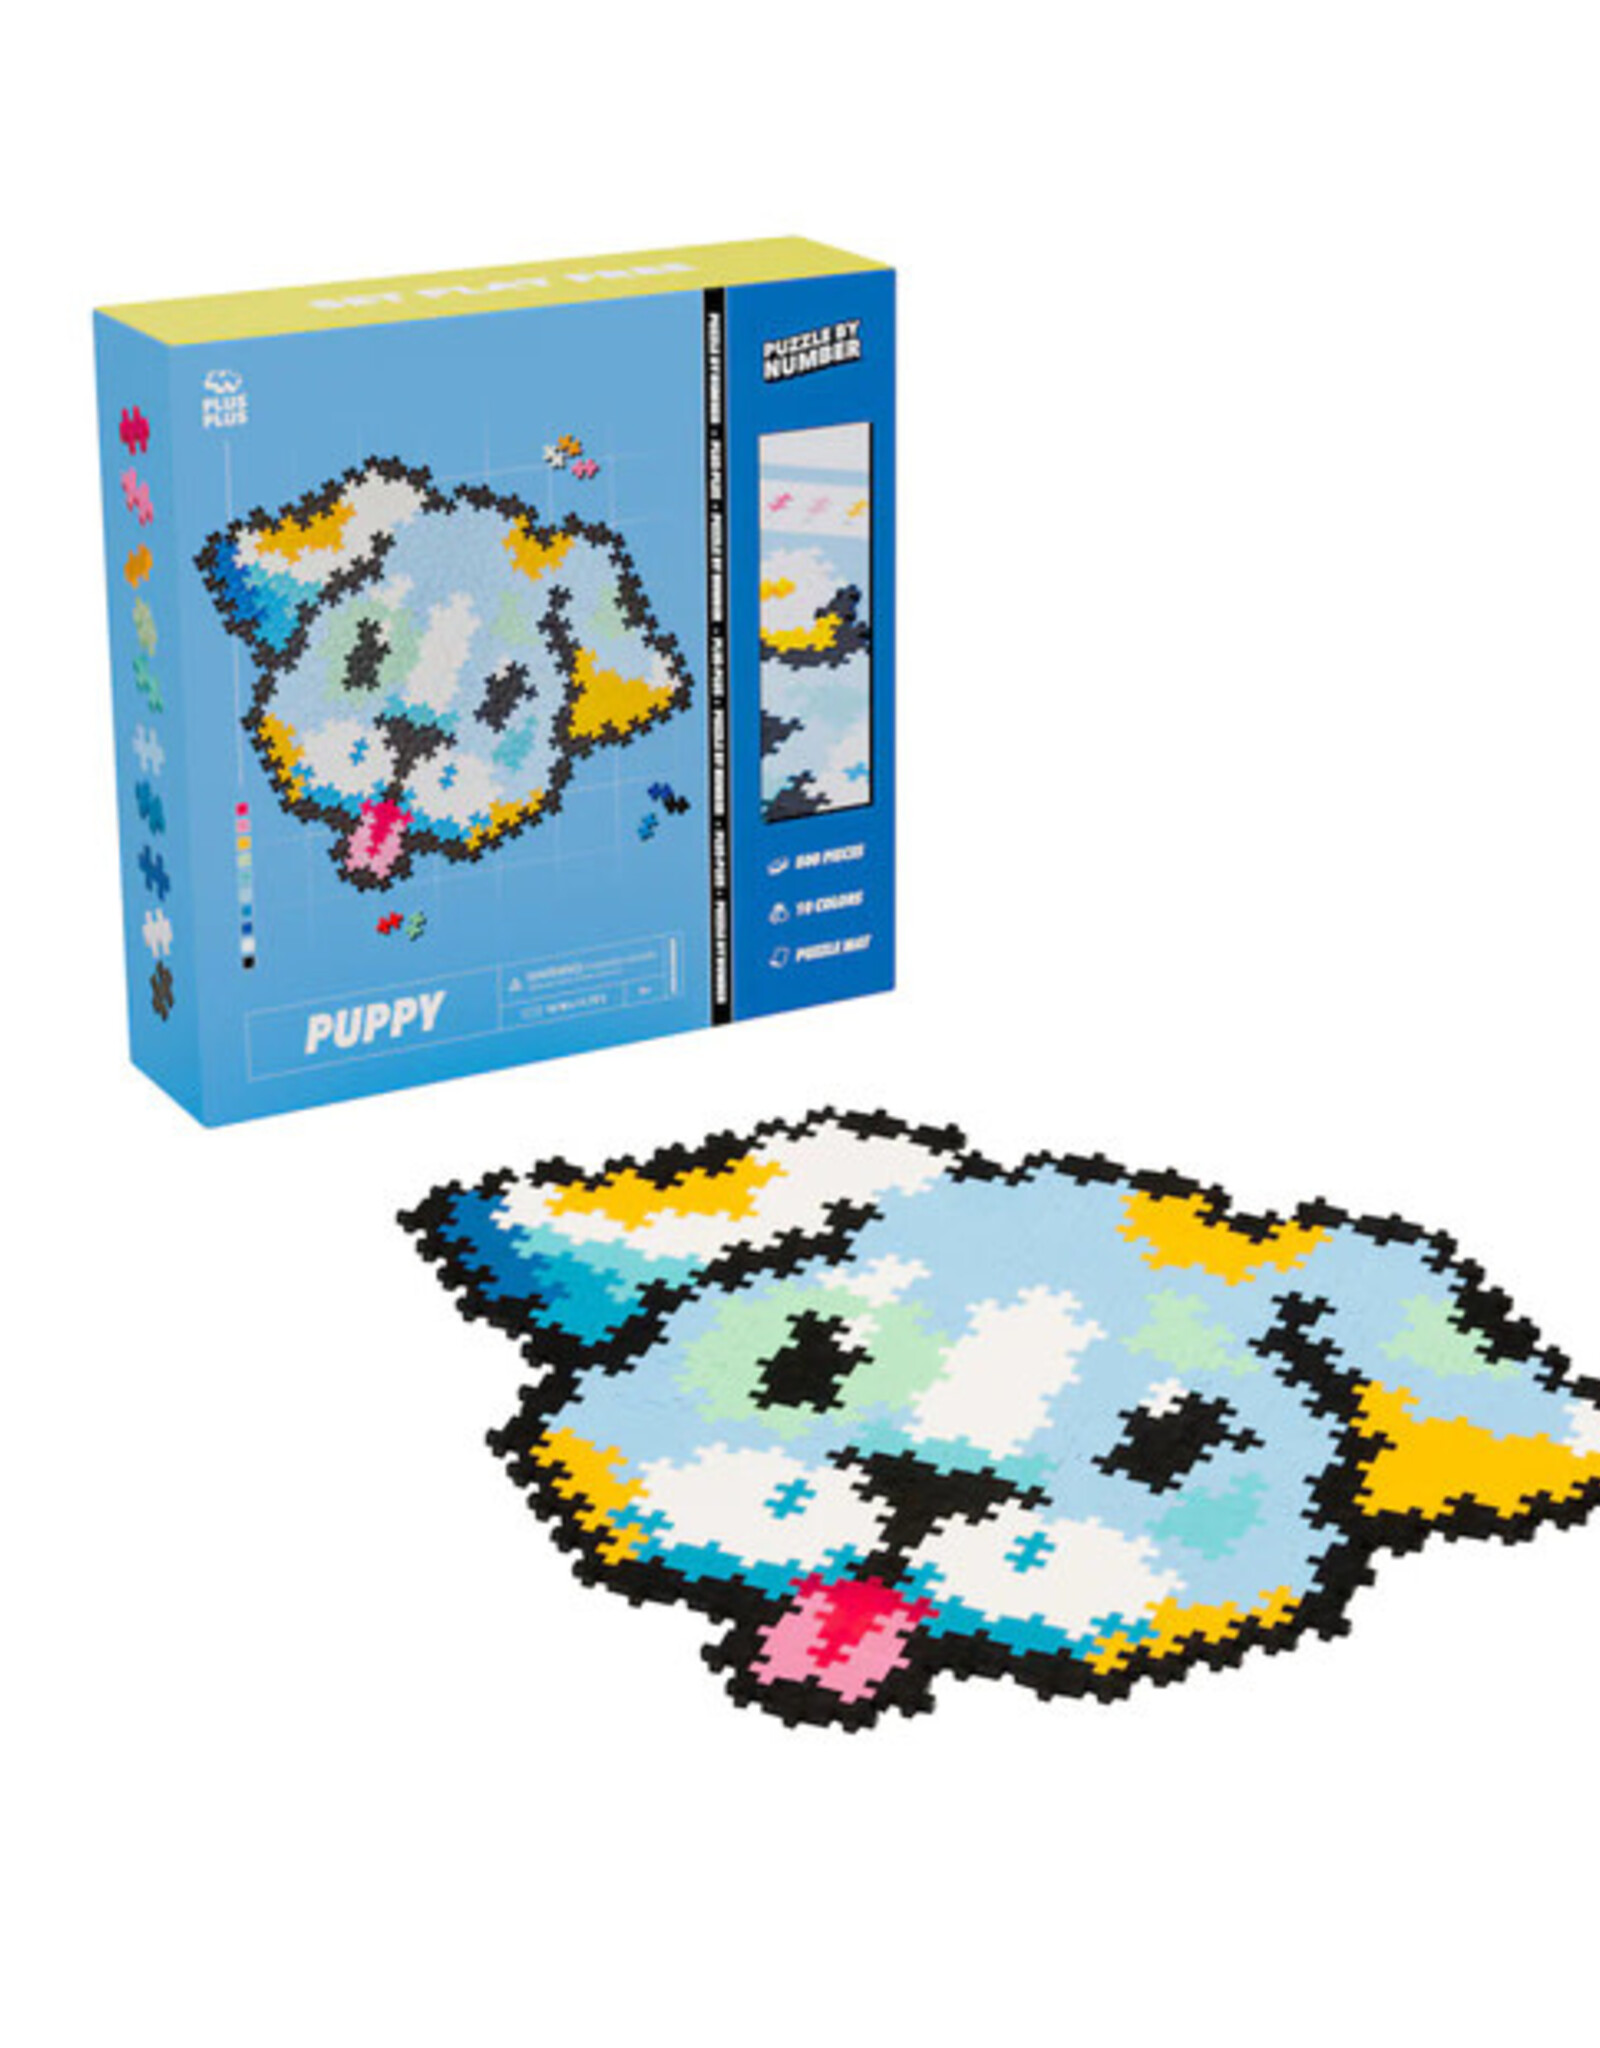 Puzzle By Number- 500 pc